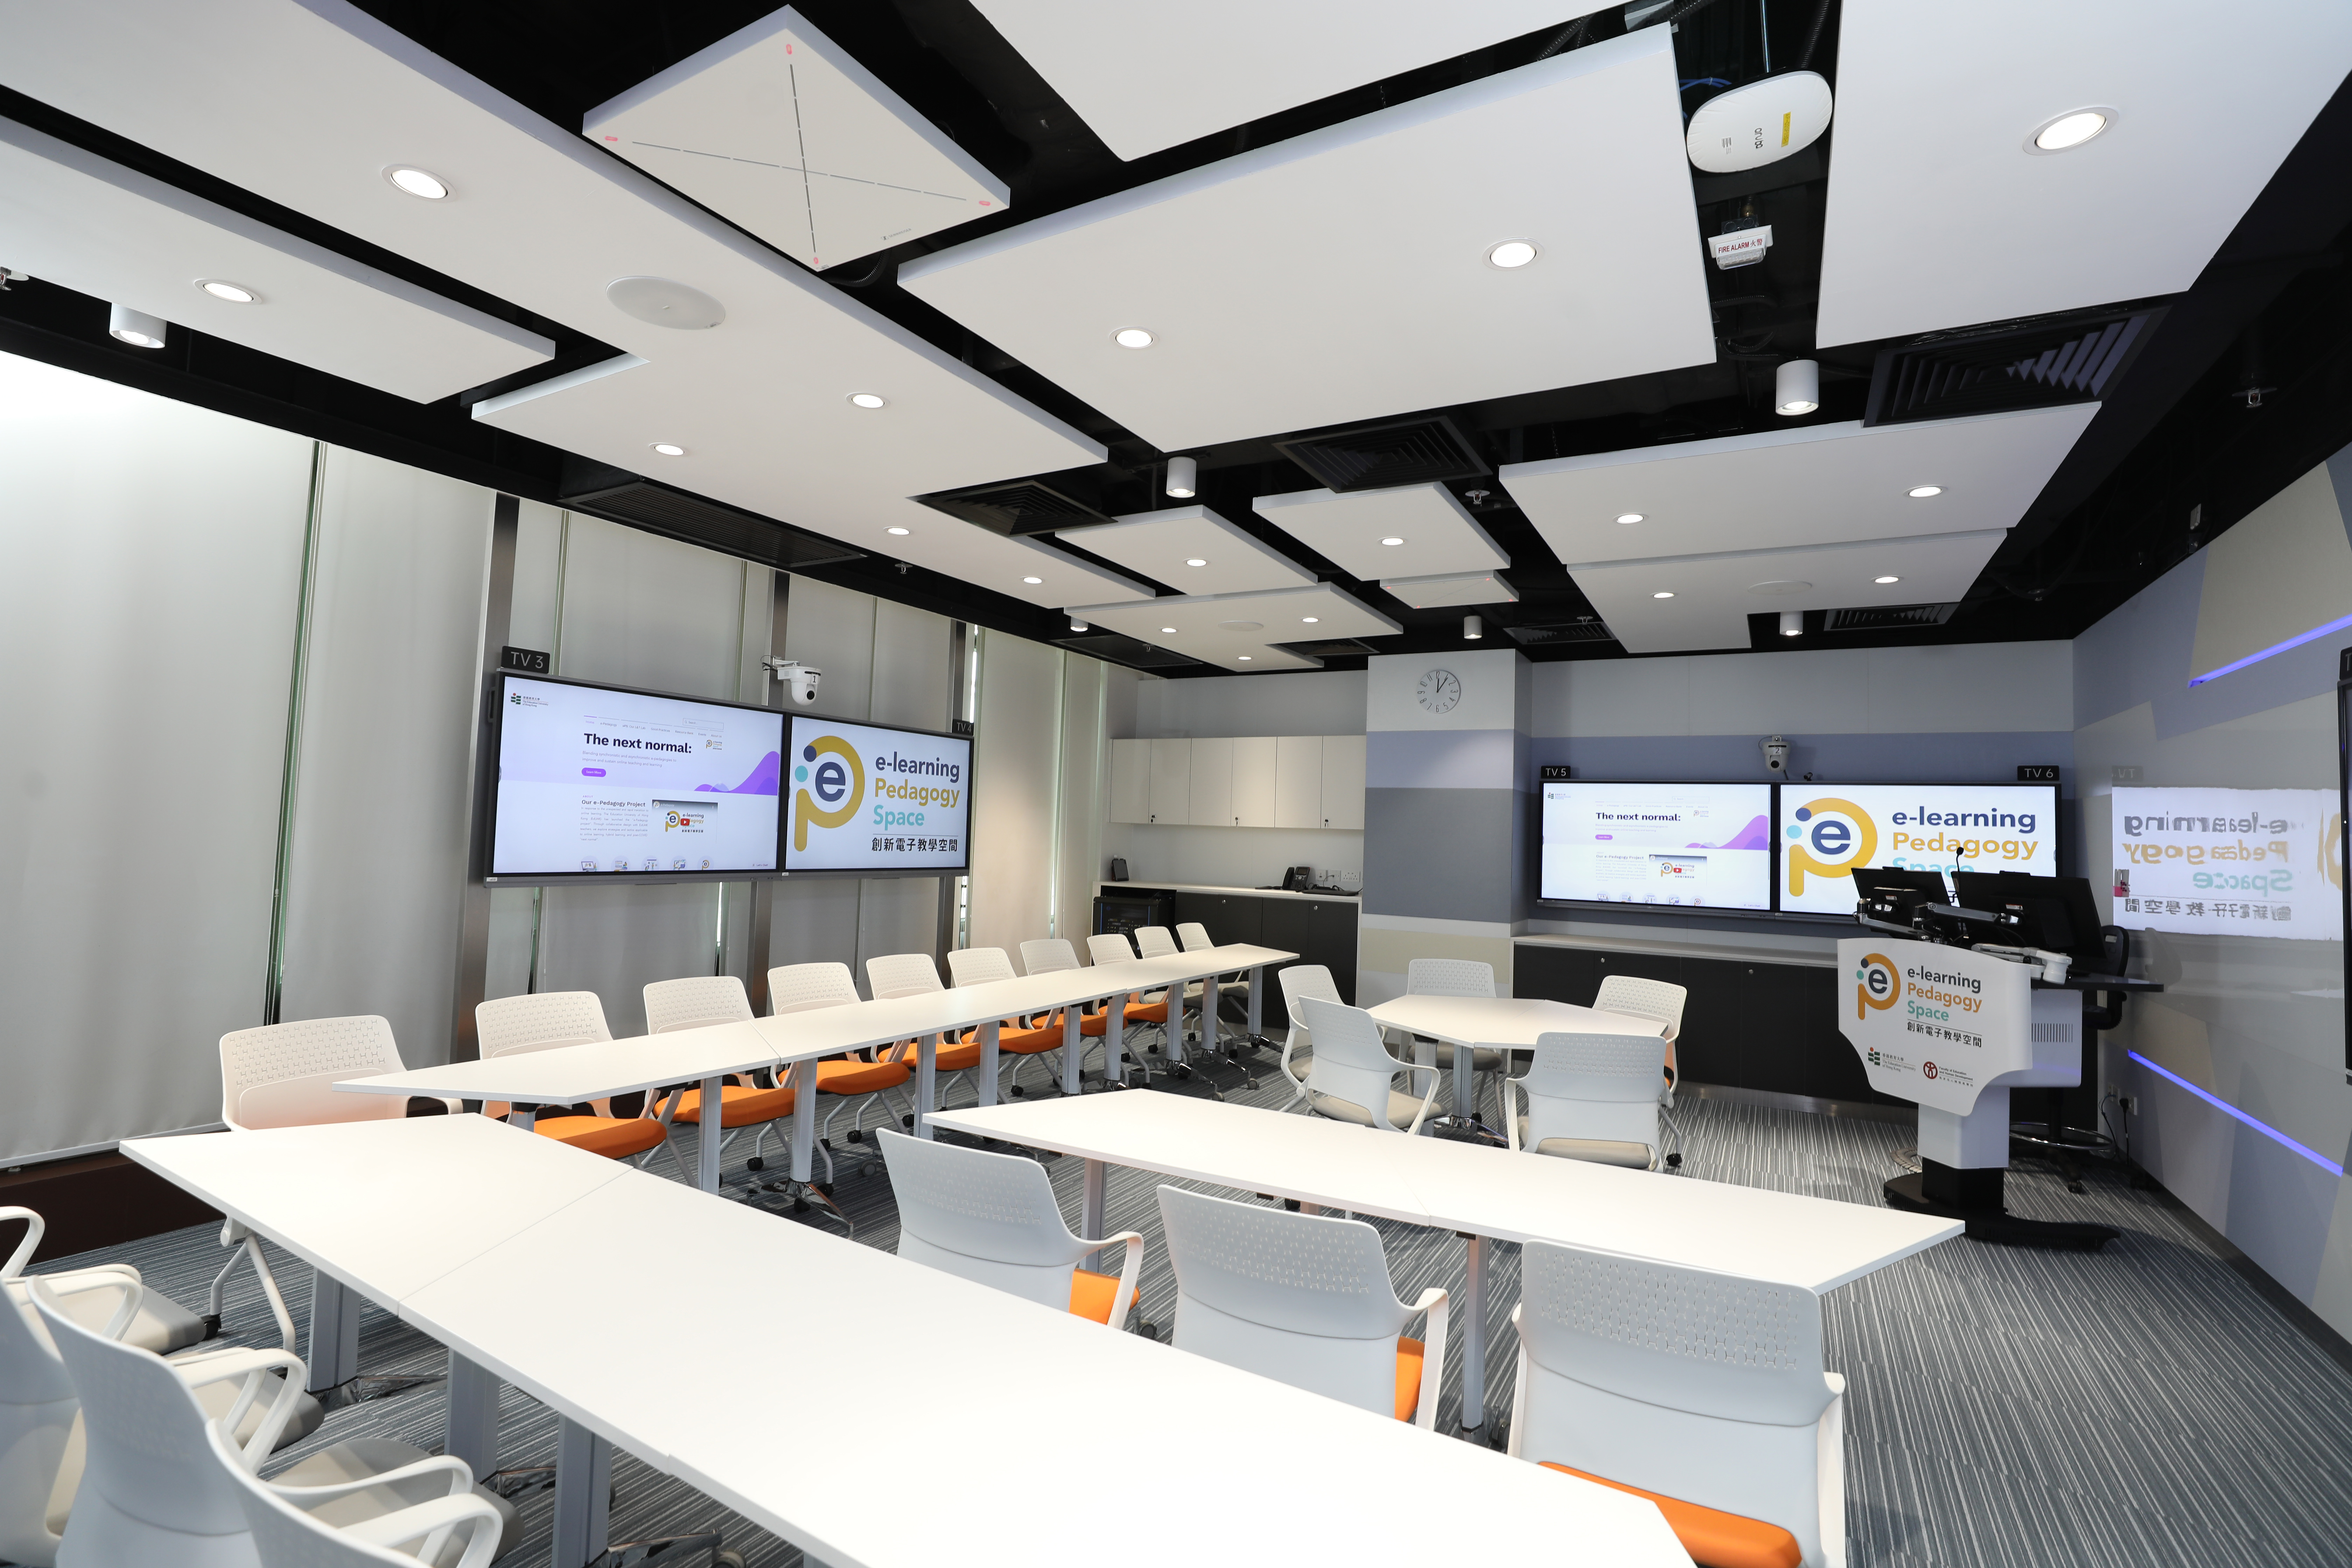 EdUHK has 2 units of TCC 2 installed in its e-learning Pedagogy Space (ePS)